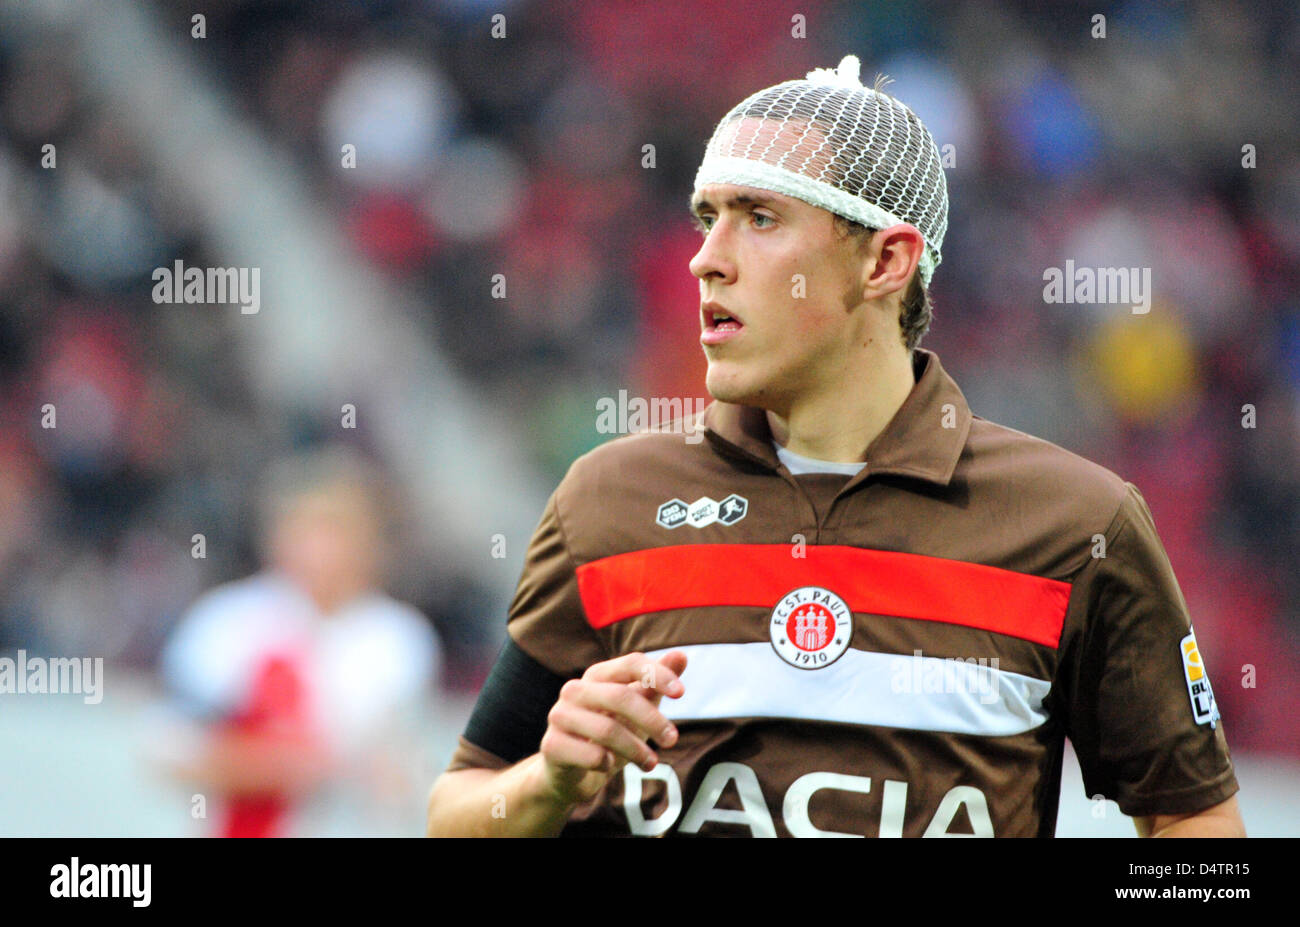 Kruse of St Pauli wearing a head protection in action the German Bundesliga Second Division matchday 13 tie FC Augsburg FC St Pauli at impuls- arena in Augsburg, Germany,